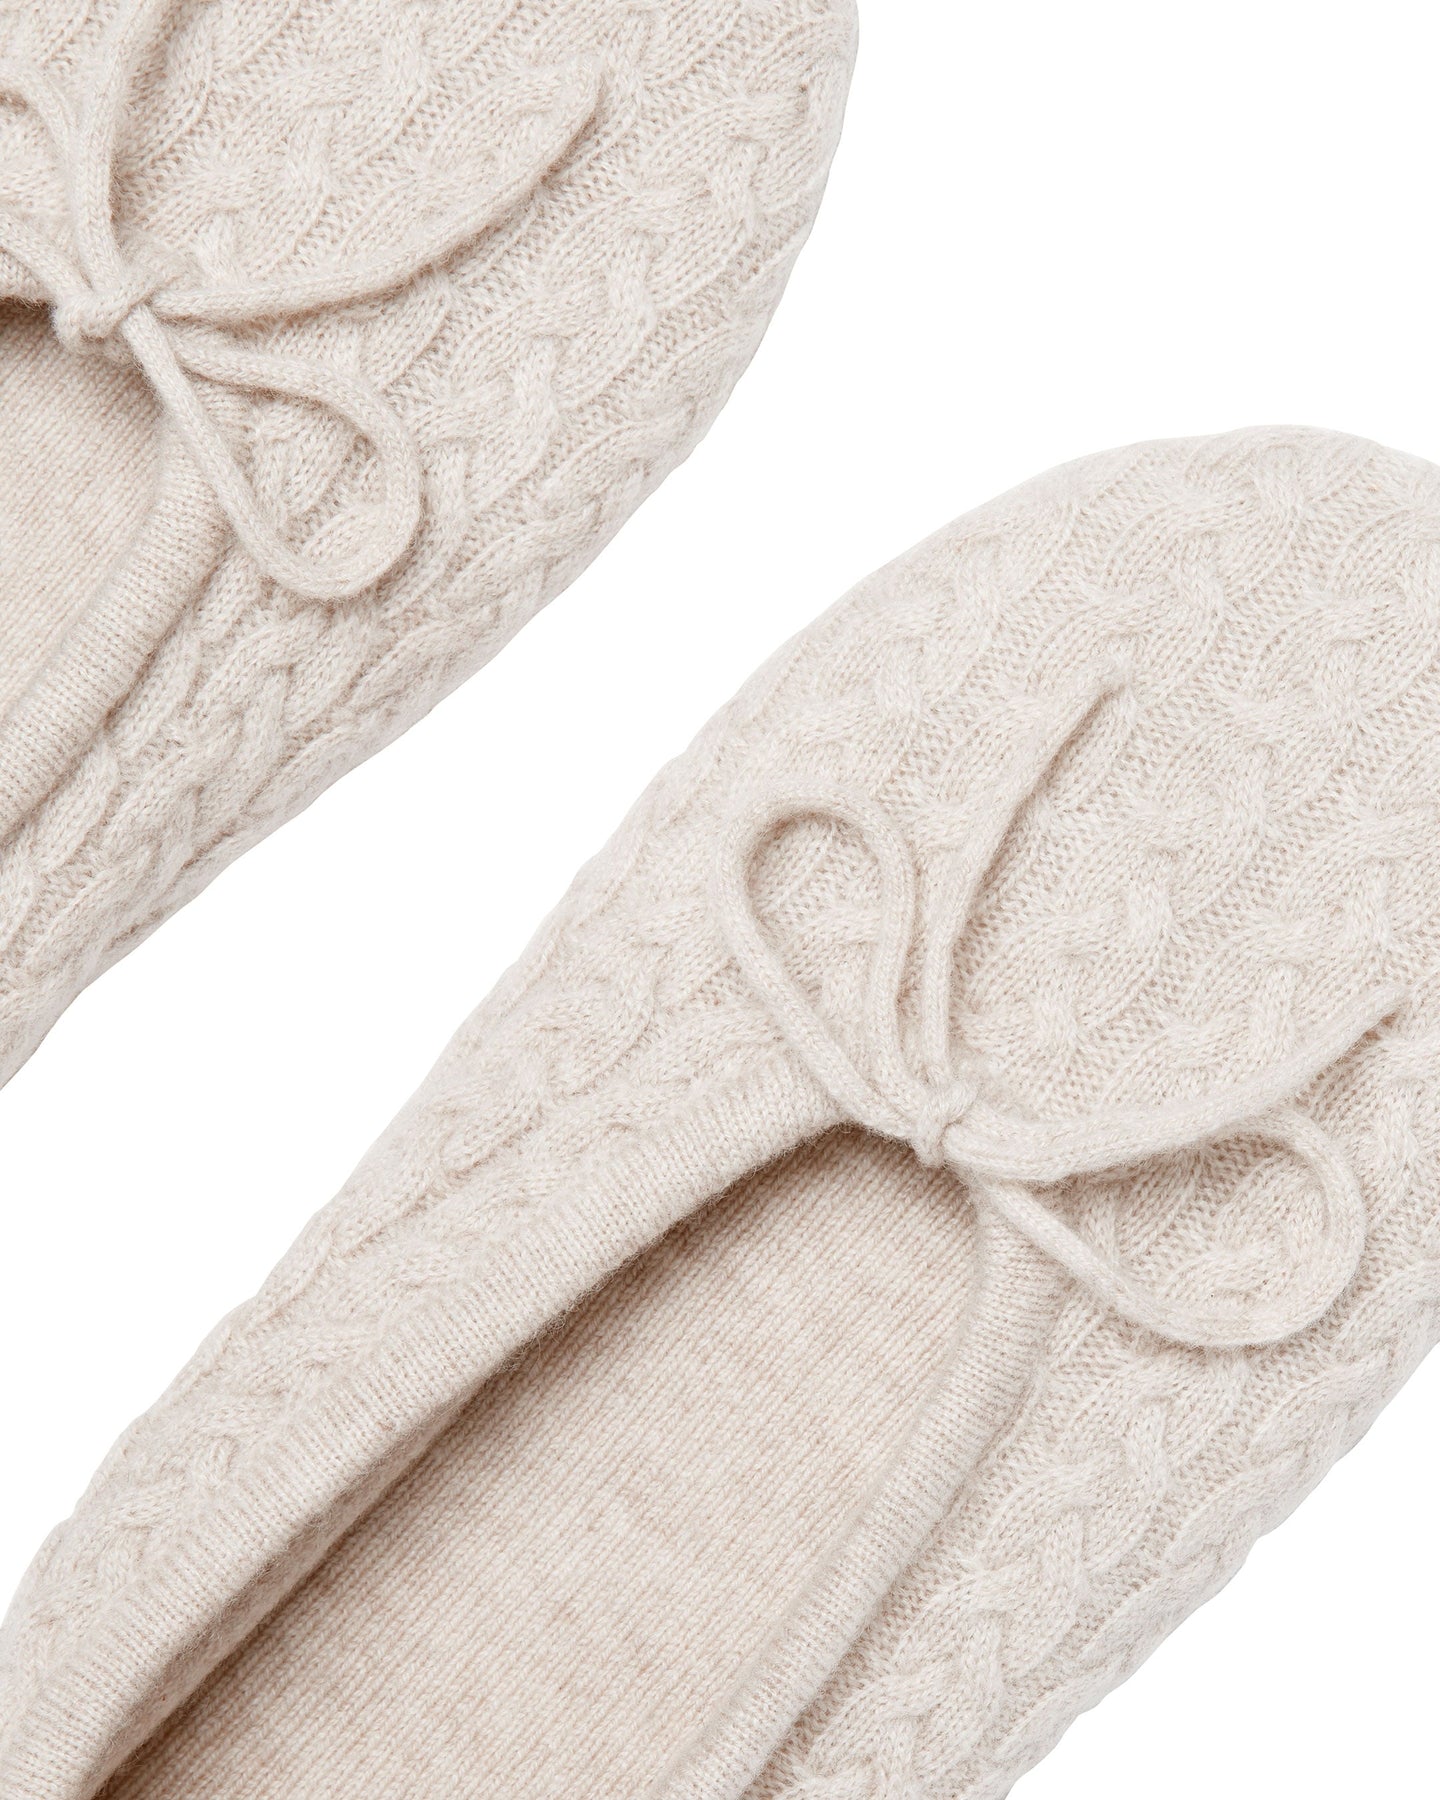 N.Peal Women's Cashmere Cable Slippers Ecru White